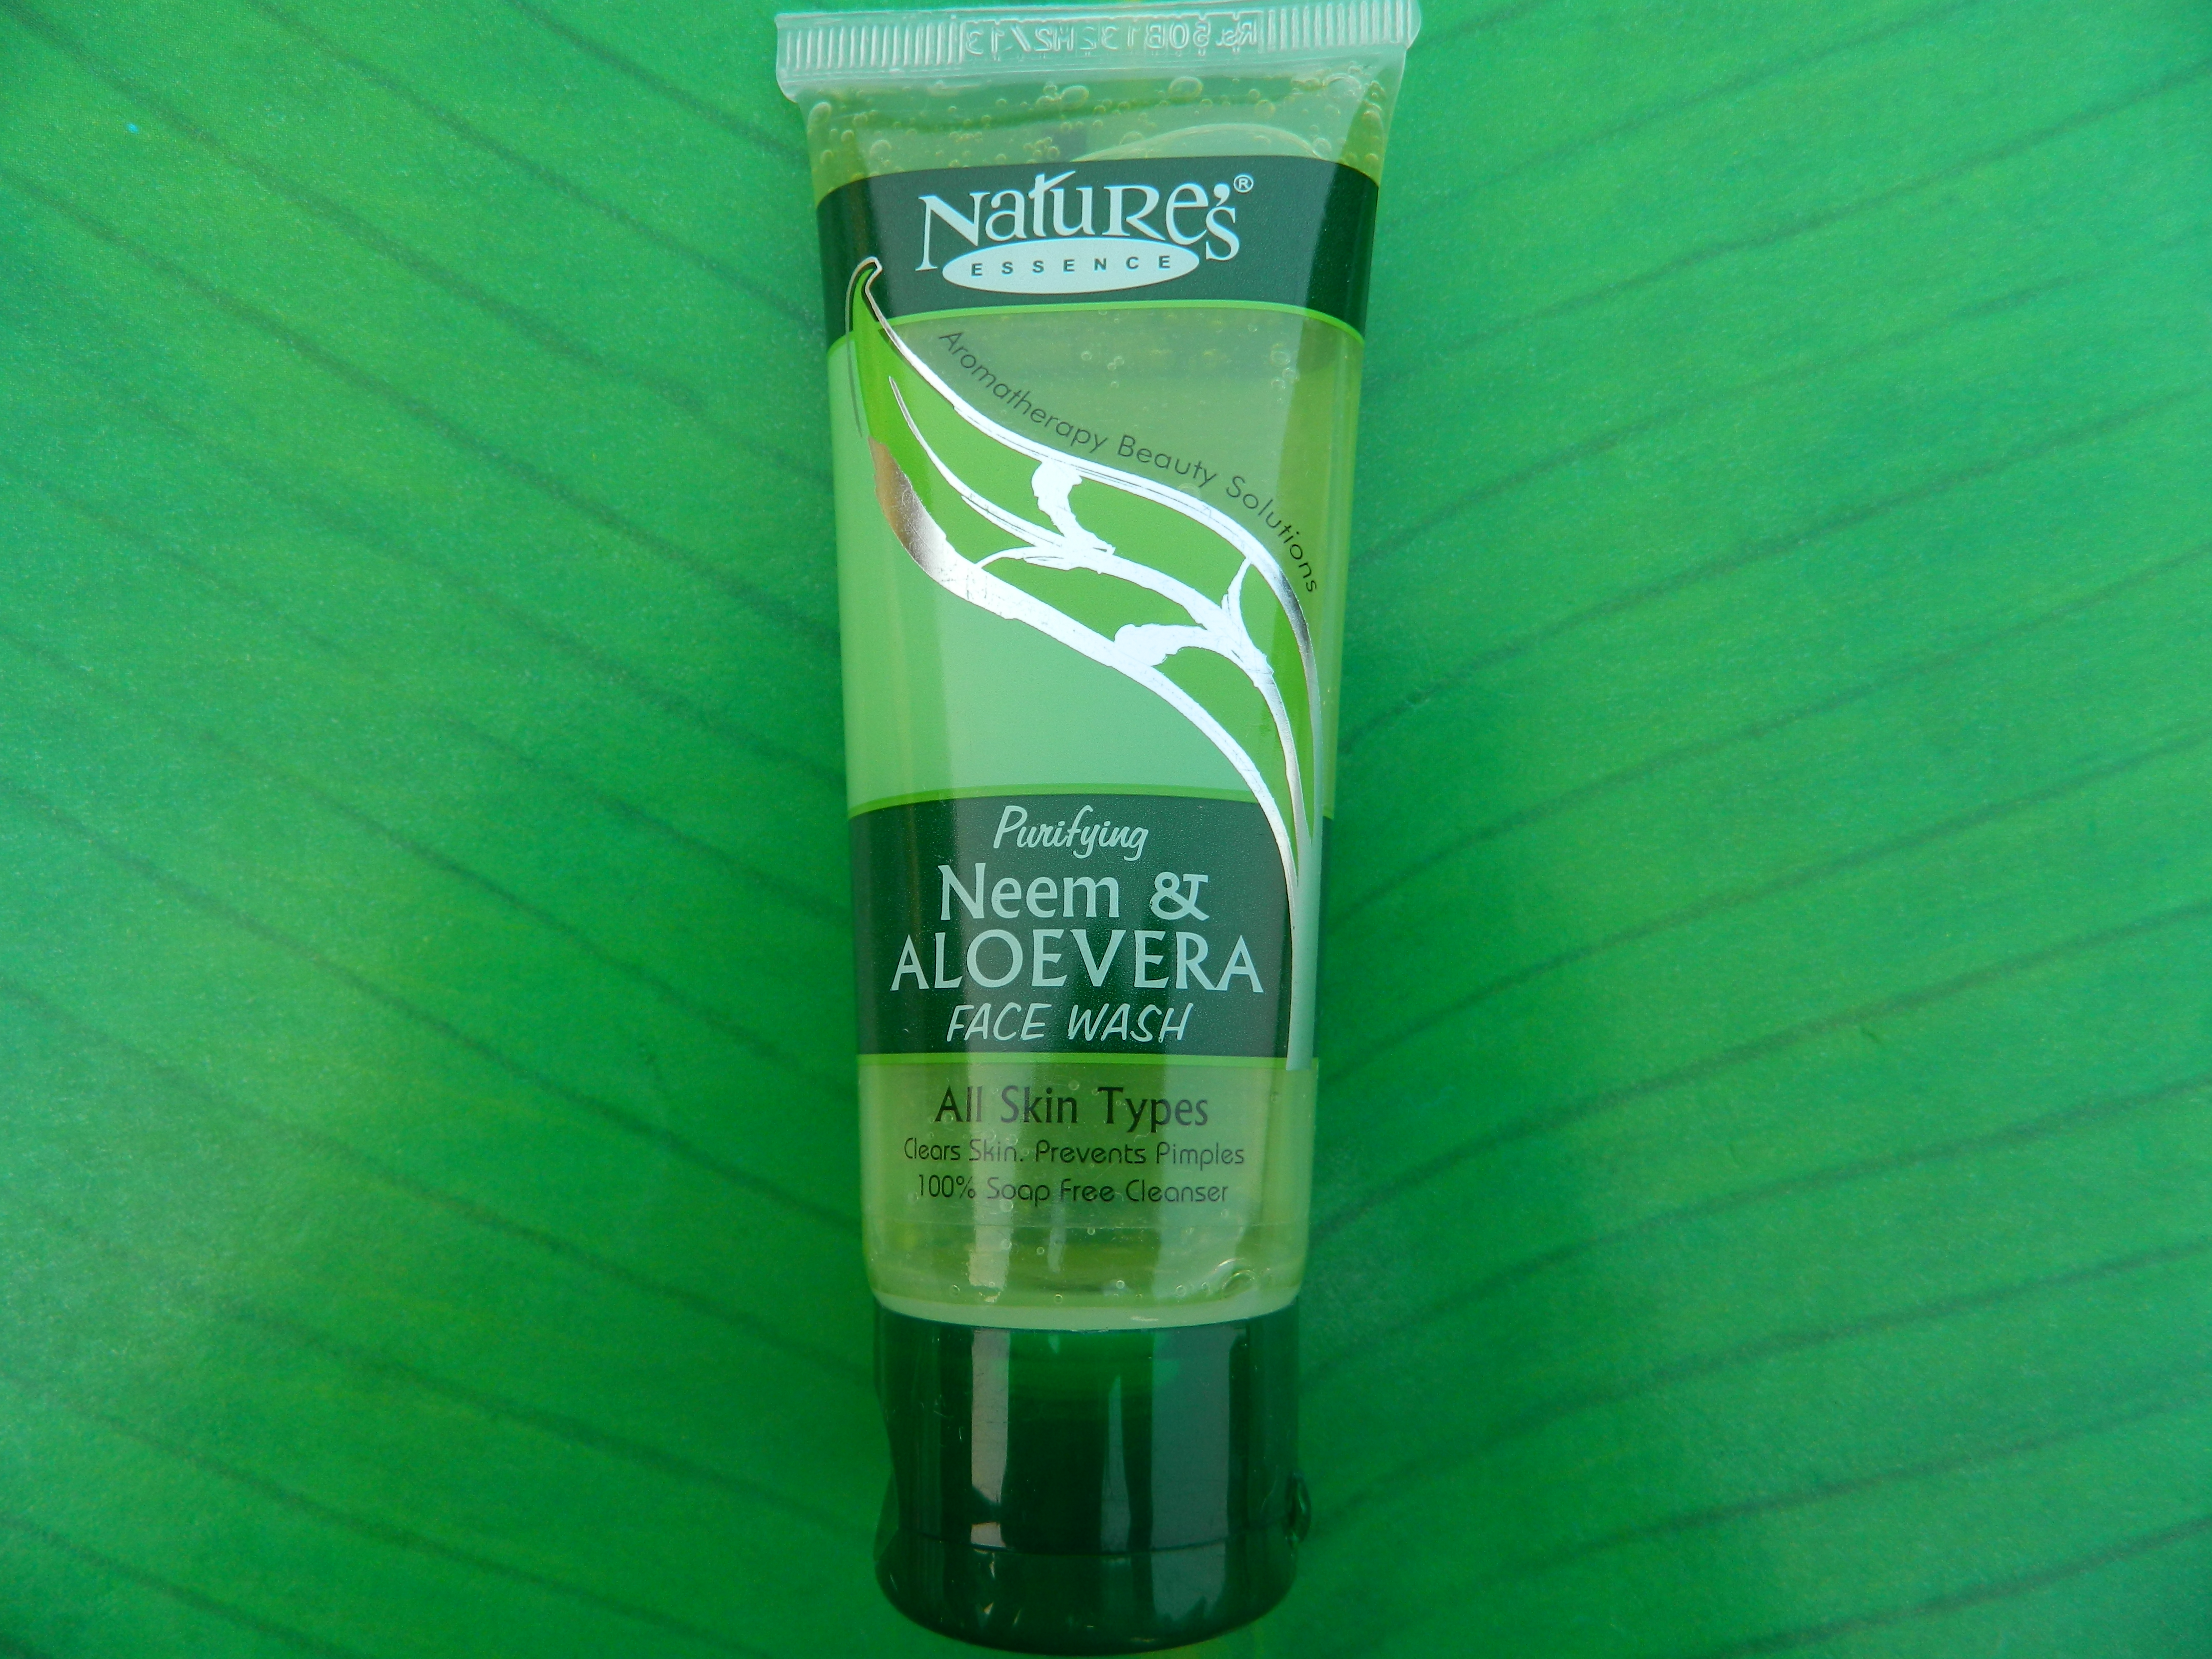 Nature’s Essence Purifying Neem & Aloevera Face Wash Review